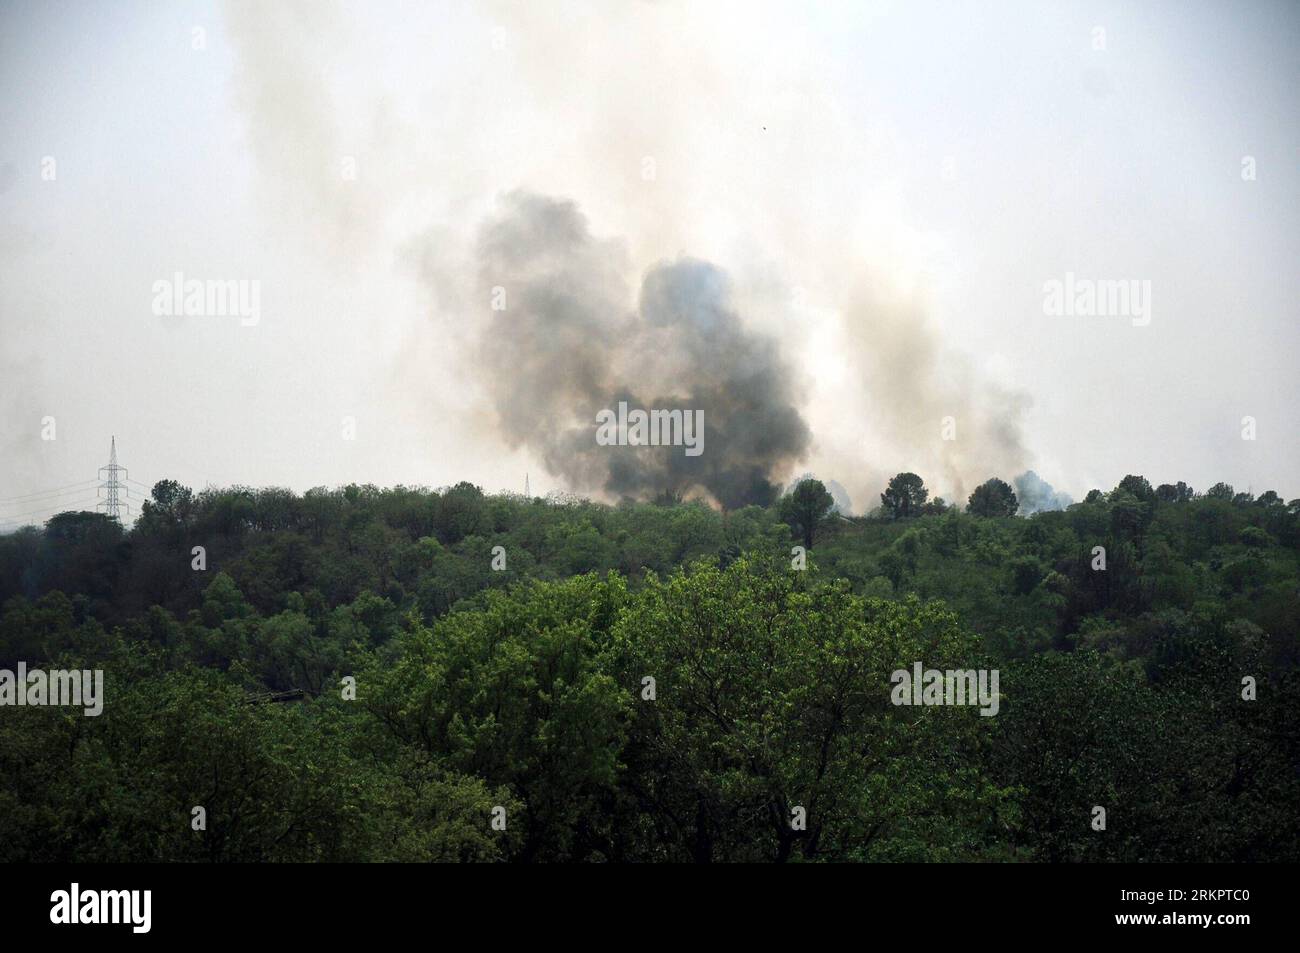 Bildnummer: 58055786  Datum: 31.05.2012  Copyright: imago/Xinhua (120531) -- ISLAMABAD, May 31, 2012 (Xinhua) -- Smoke rises from the forest in Islamabad, capital of Pakistan on May 31, 2012. Fire erupted on Margala Hills due to hot weather, gutting a huge stretch of forest. (Xinhua/Ahmad Kamal) PAKISTAN-ISLAMABAD-FOREST FIRE PUBLICATIONxNOTxINxCHN Gesellschaft Waldbrand Brand Feuer Rauch xbs x0x 2012 quer      58055786 Date 31 05 2012 Copyright Imago XINHUA  Islamabad May 31 2012 XINHUA Smoke Rises from The Forest in Islamabad Capital of Pakistan ON May 31 2012 Fire erupted ON Margala Hills D Stock Photo